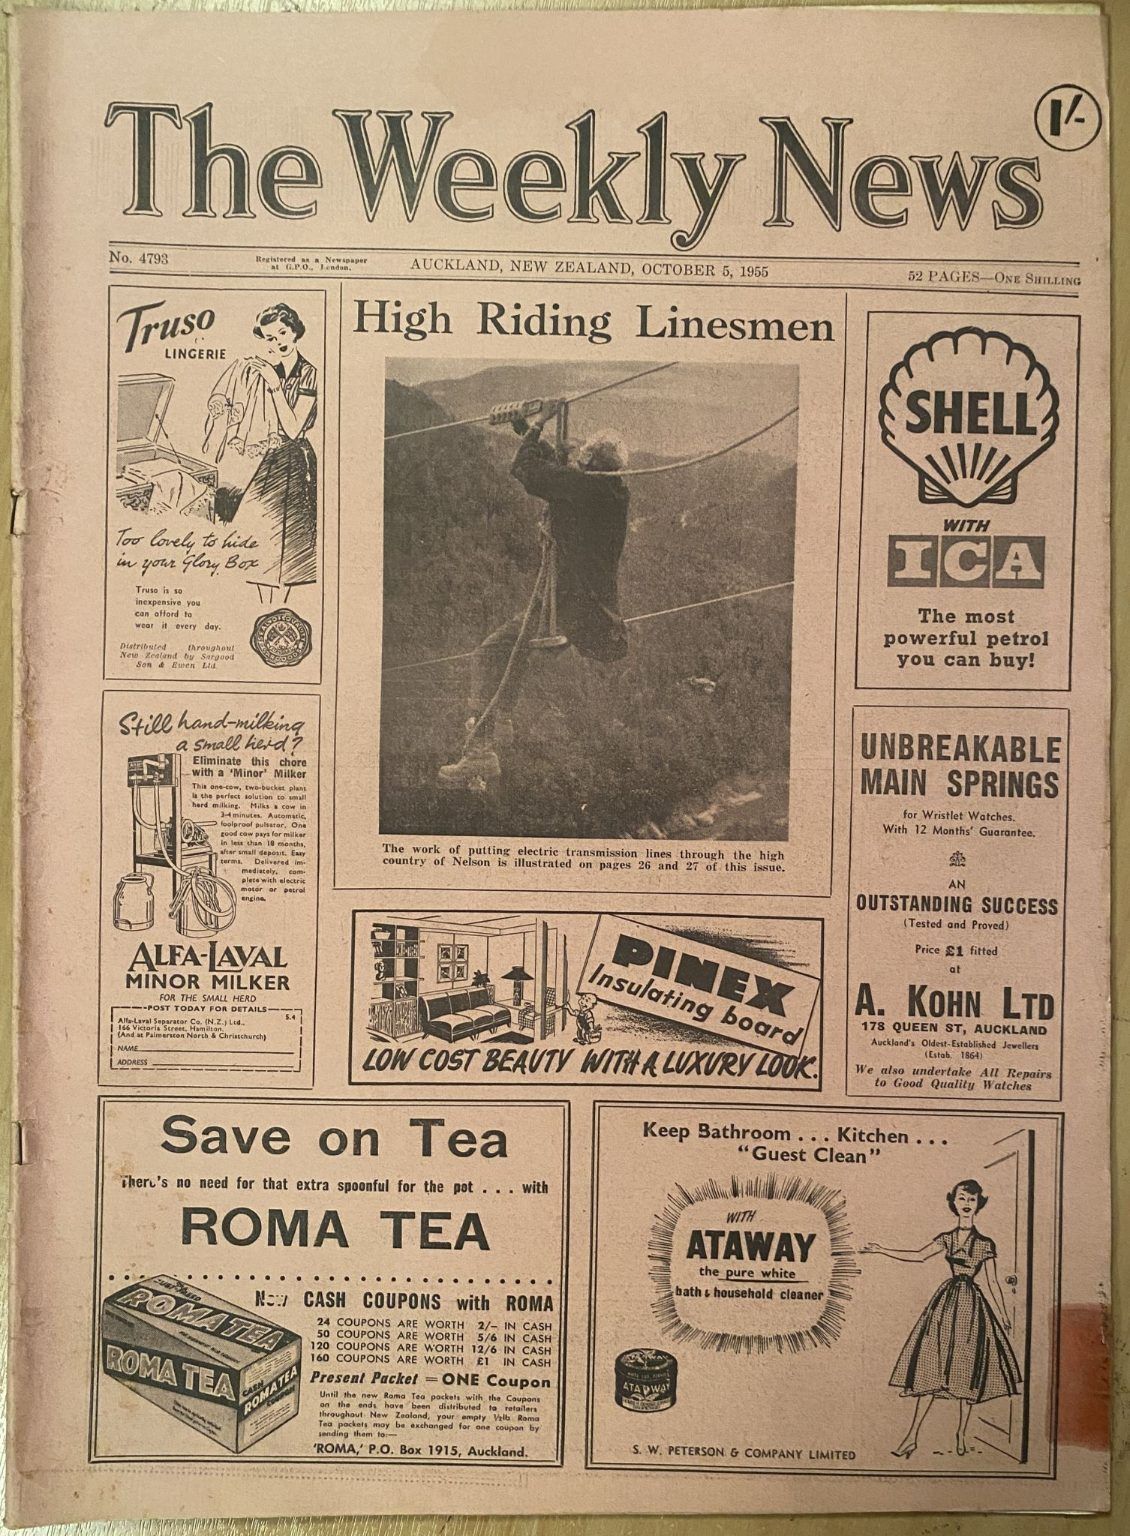 OLD NEWSPAPER: The Weekly News - No. 4793, 5 October 1955